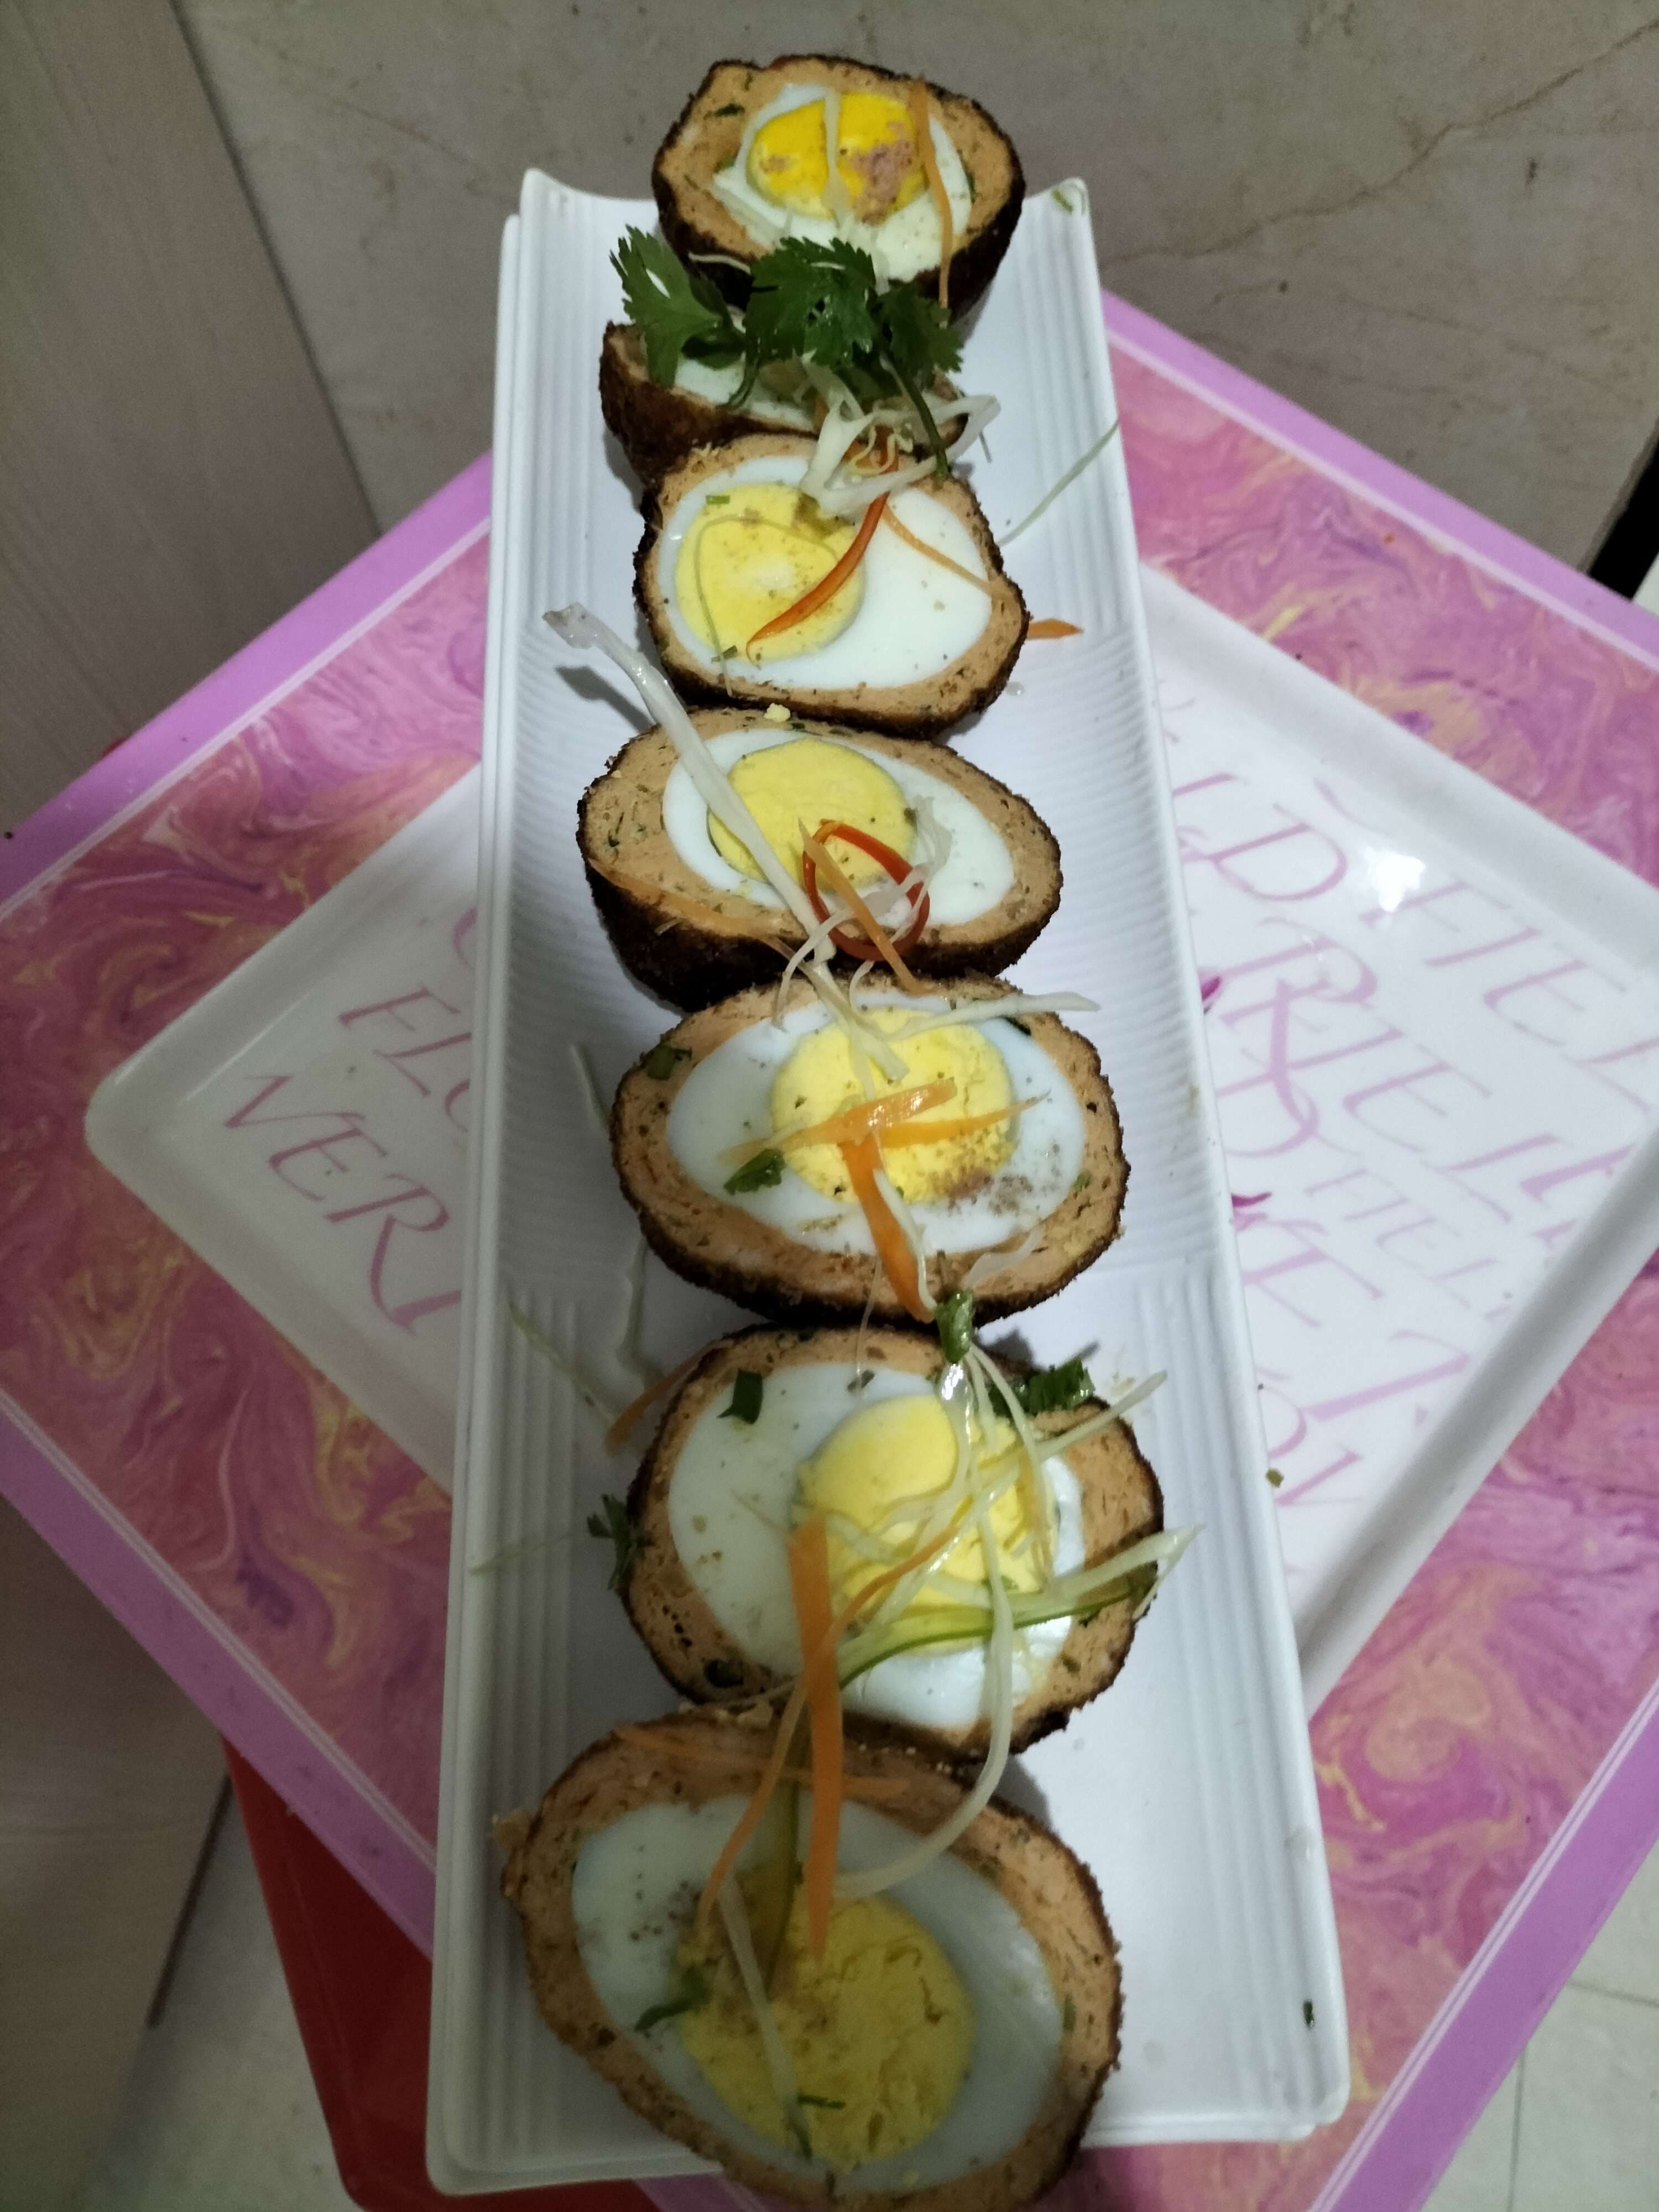 Tasty Scotch Eggs cooked by COOX chefs cooks during occasions parties events at home